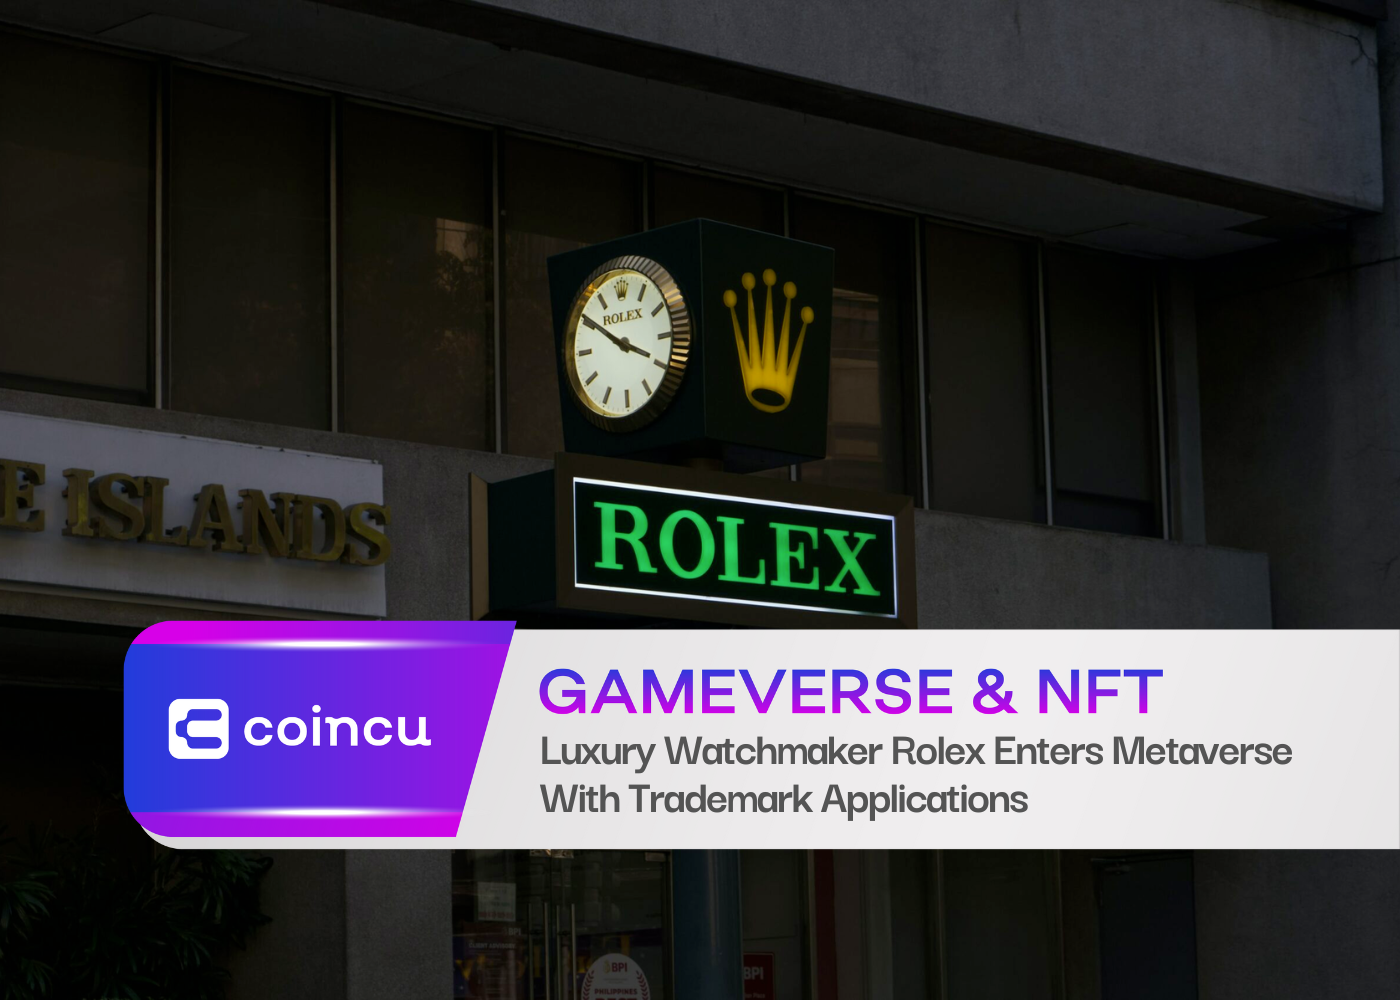 Luxury Watchmaker Rolex Enters Metaverse With Trademark Applications